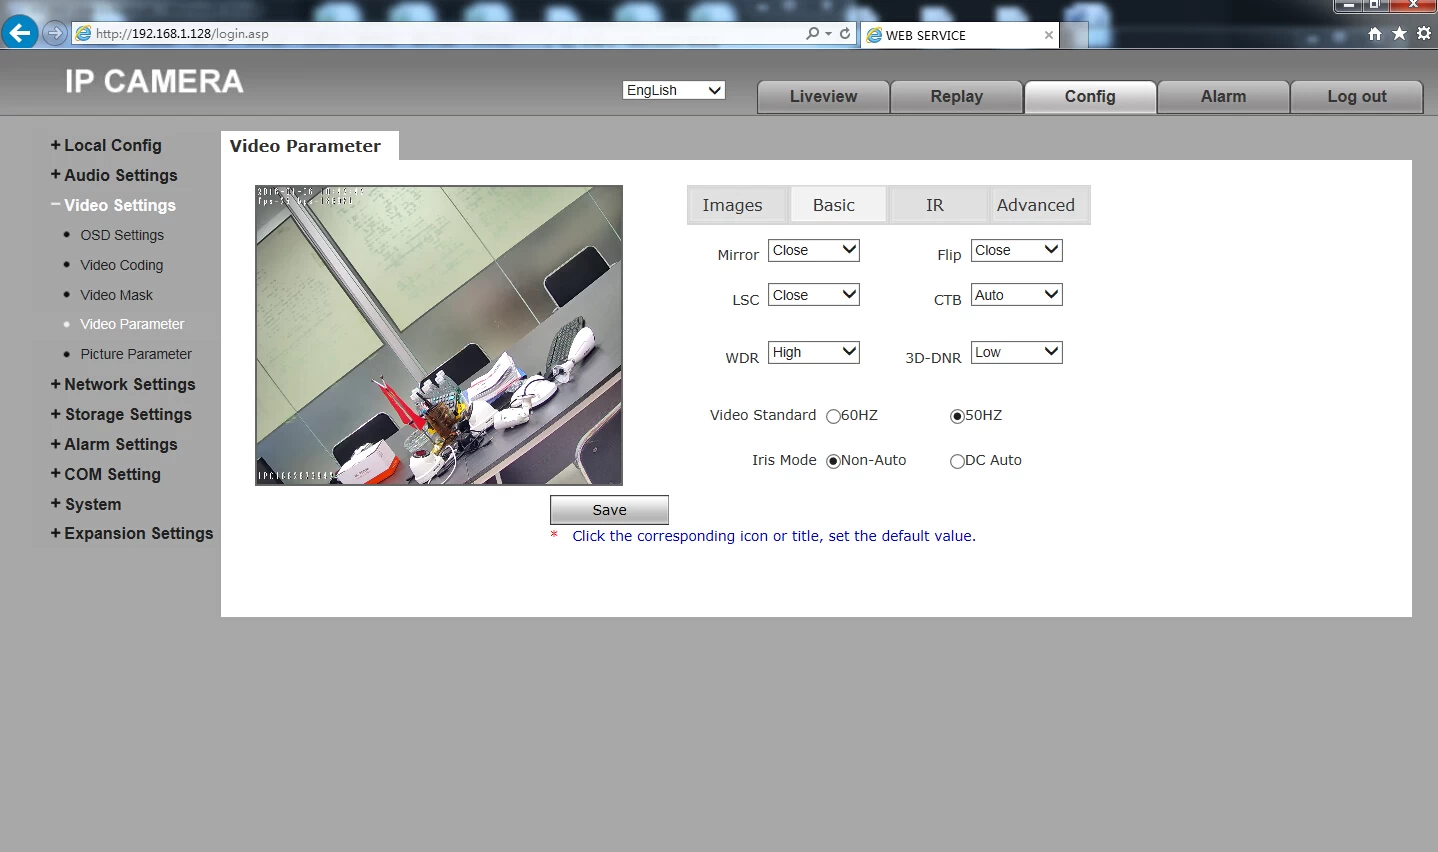 View IP Camera by IE